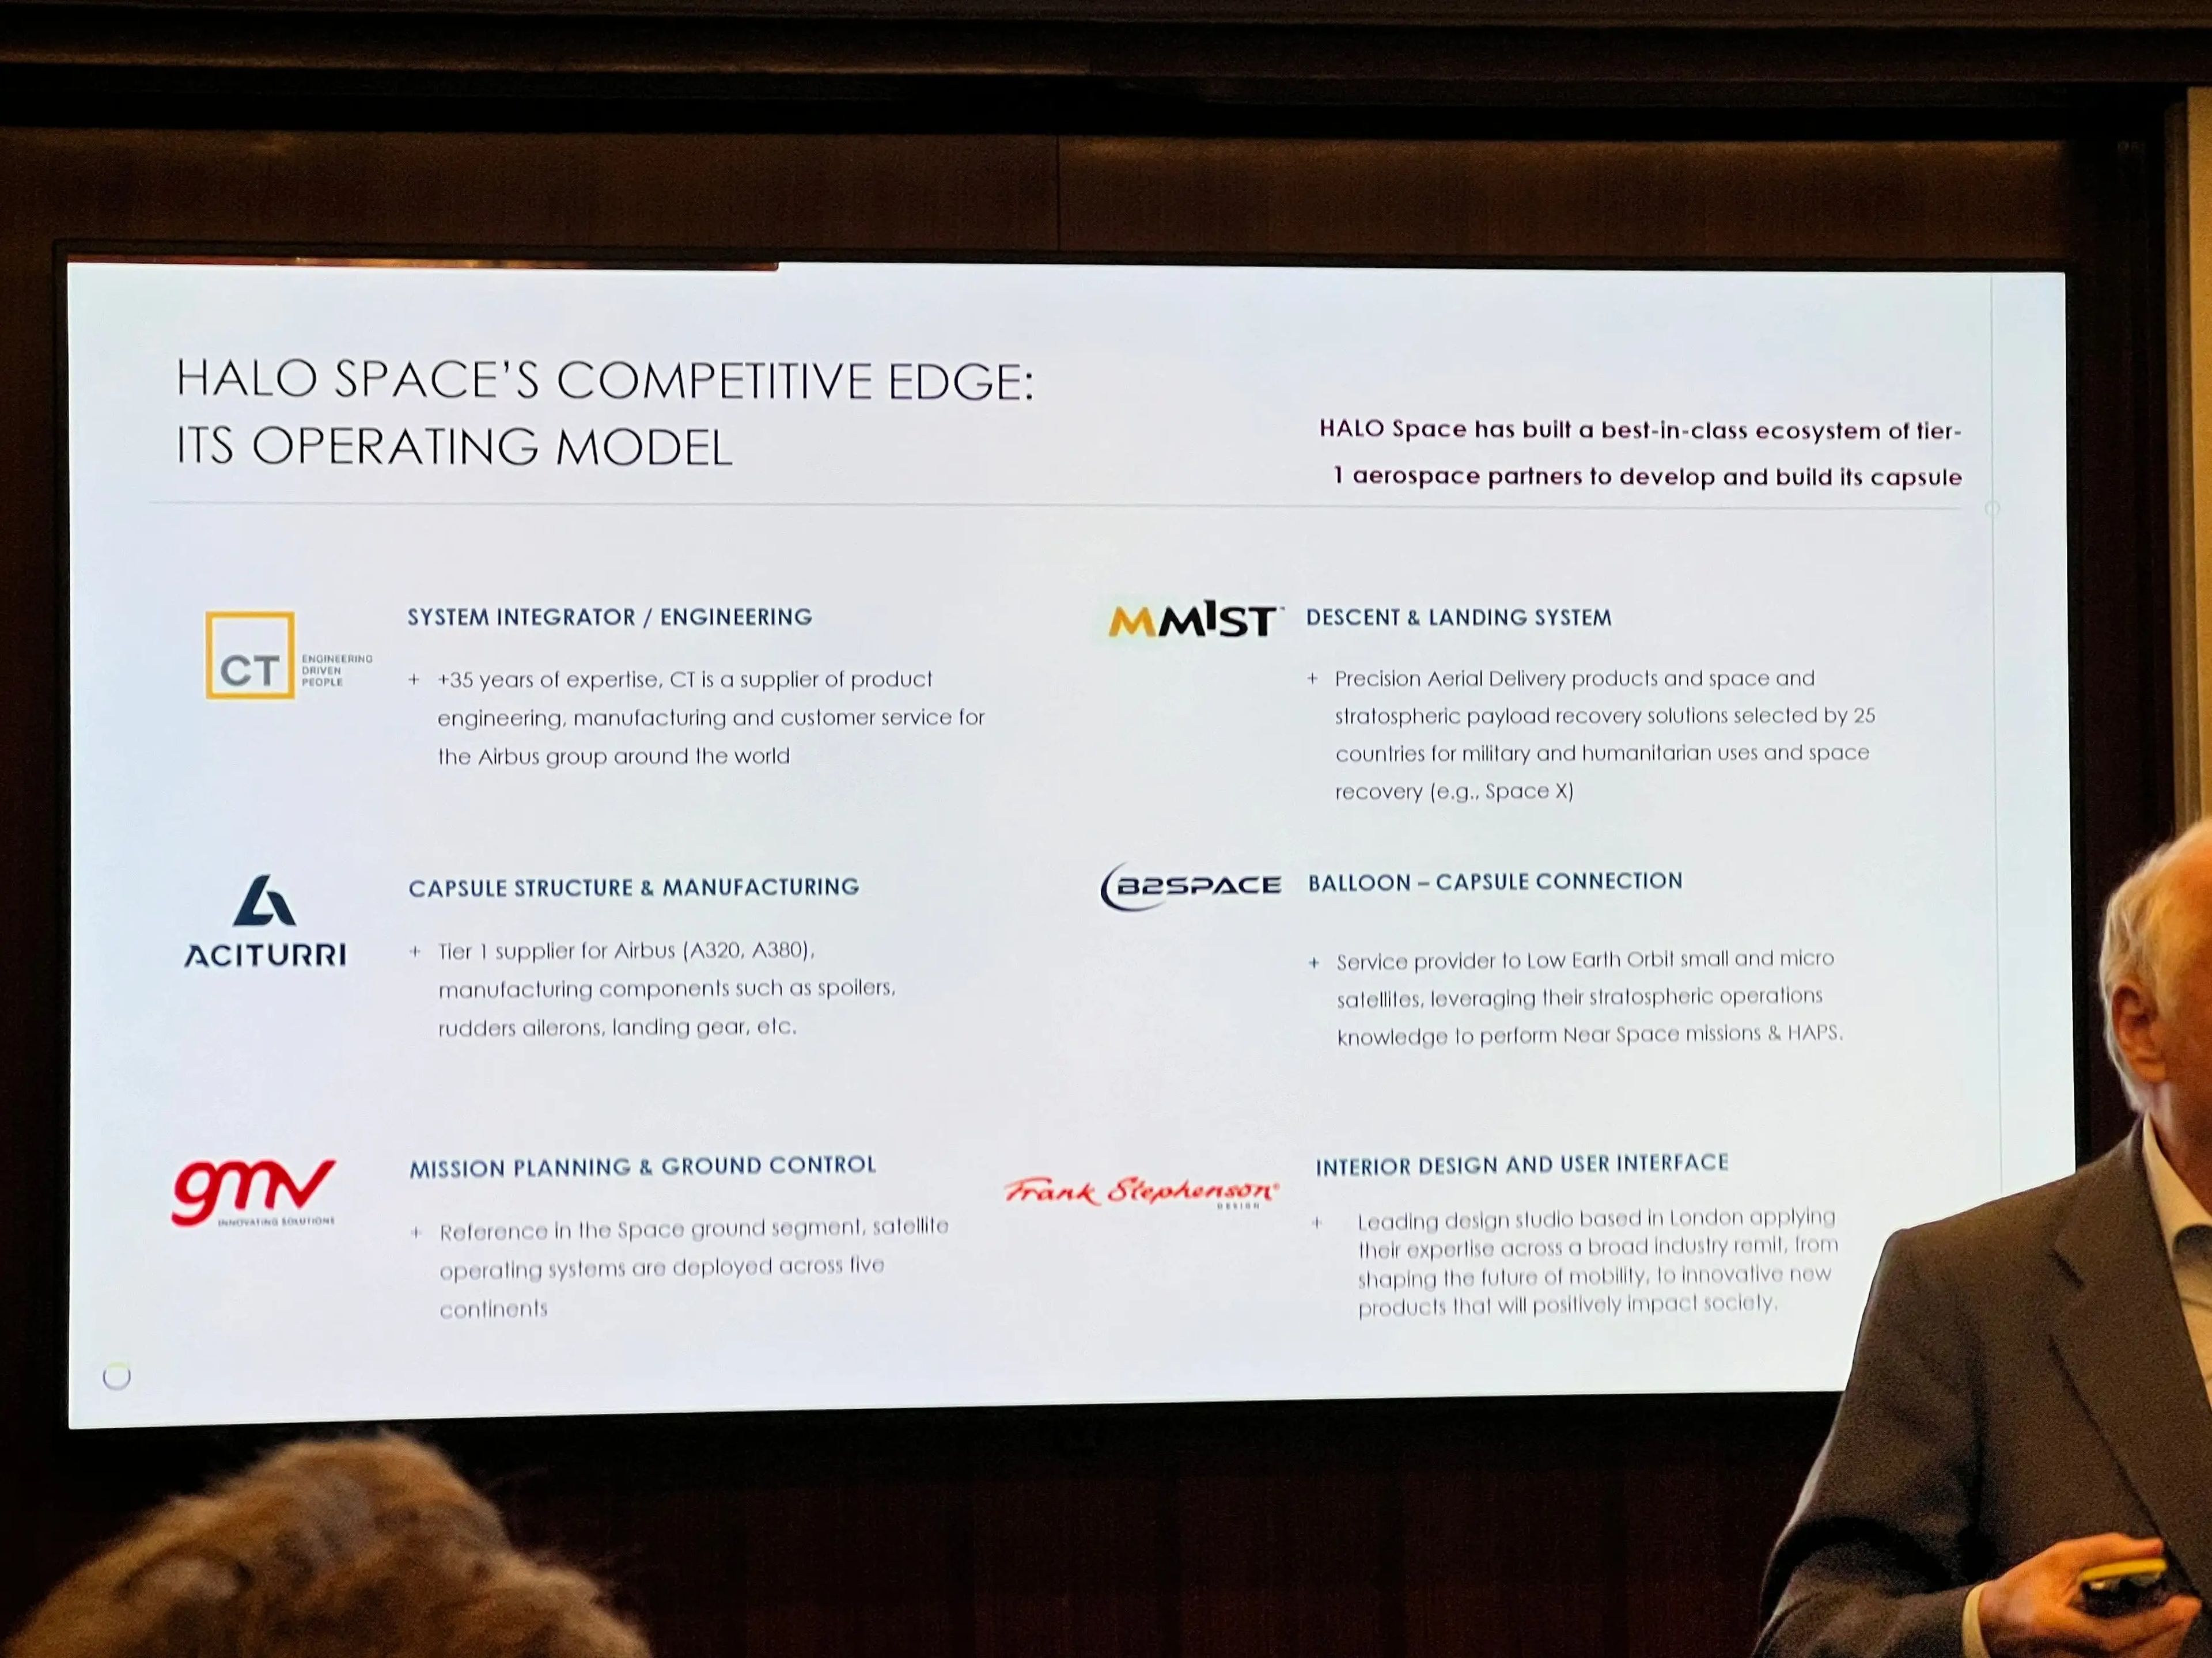 Halo Space CEO Carlos Mira stands in front of a presentation describing the firm's partner companies.